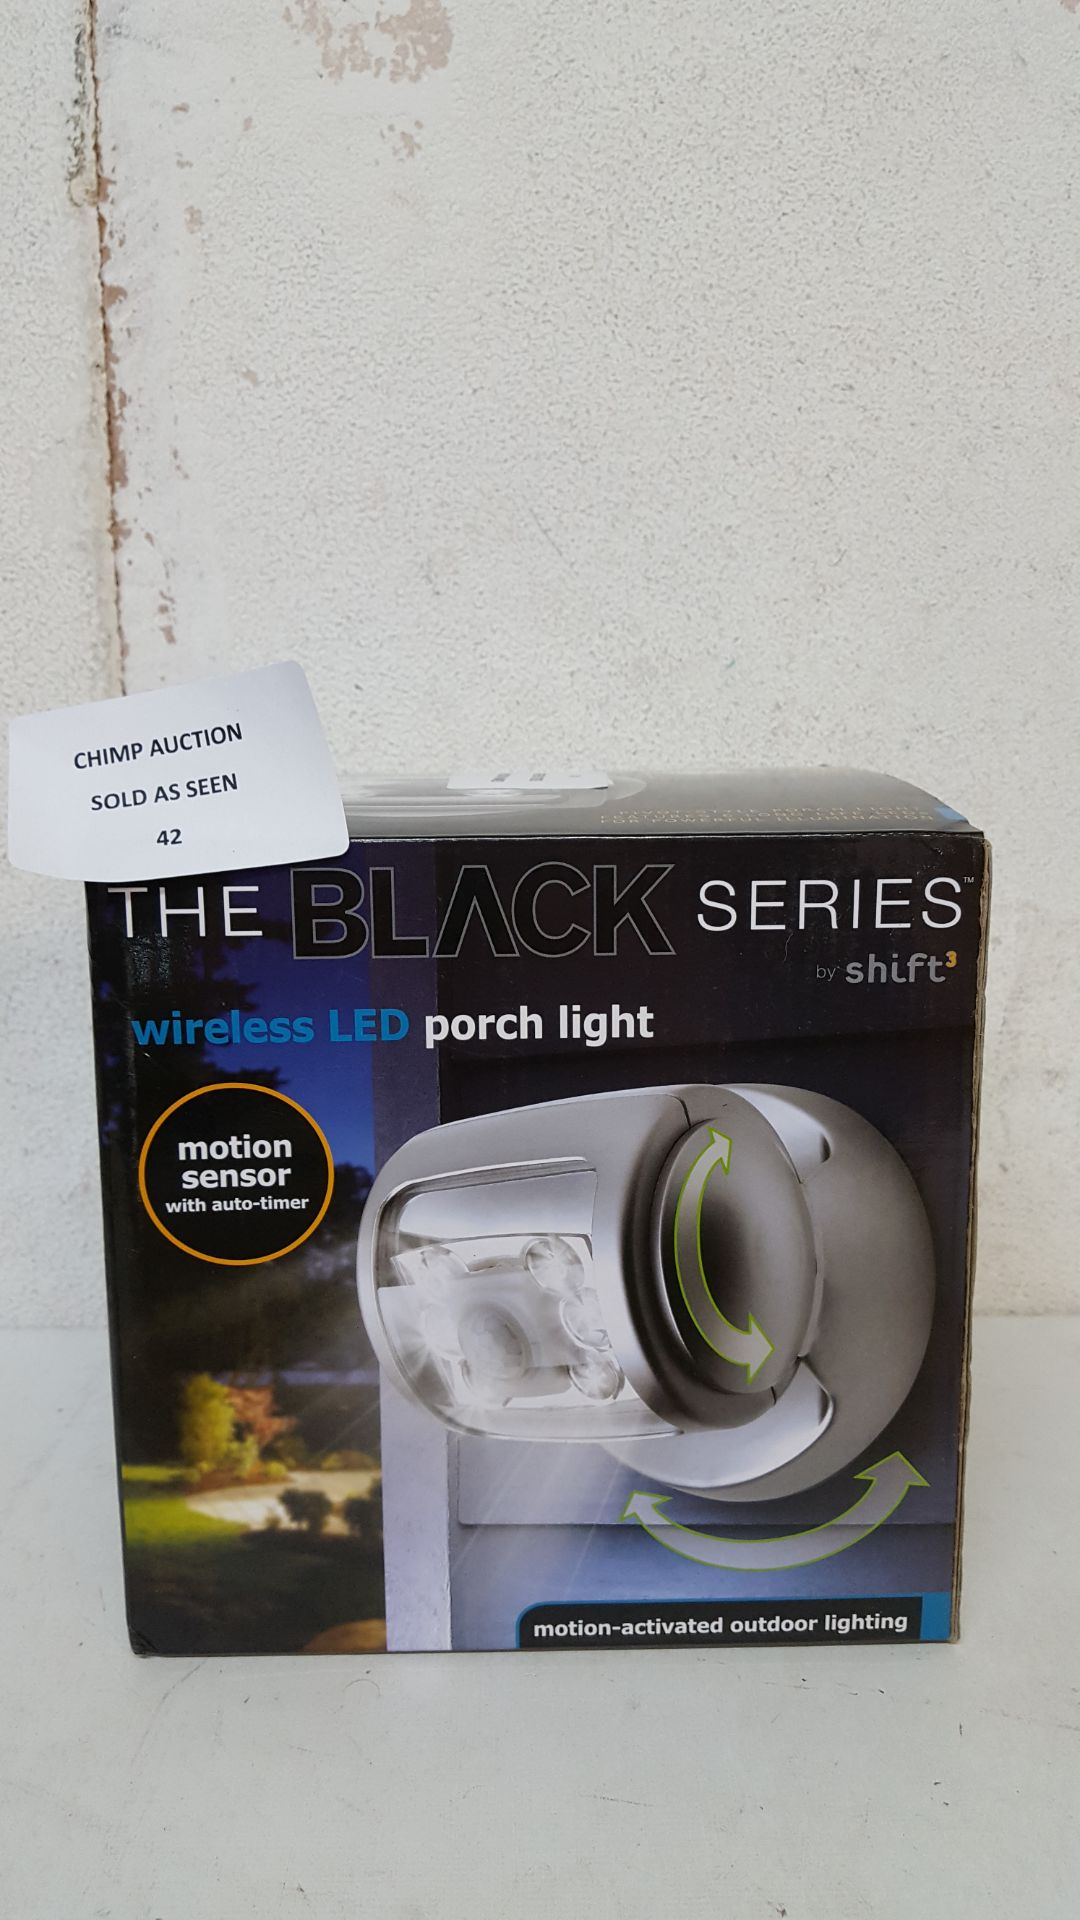 BRAND NEW THE BLK SERIES WIRELESS LED PORCH SECURITY LIGHT WITH PIR SENSOR RRP £79.99/